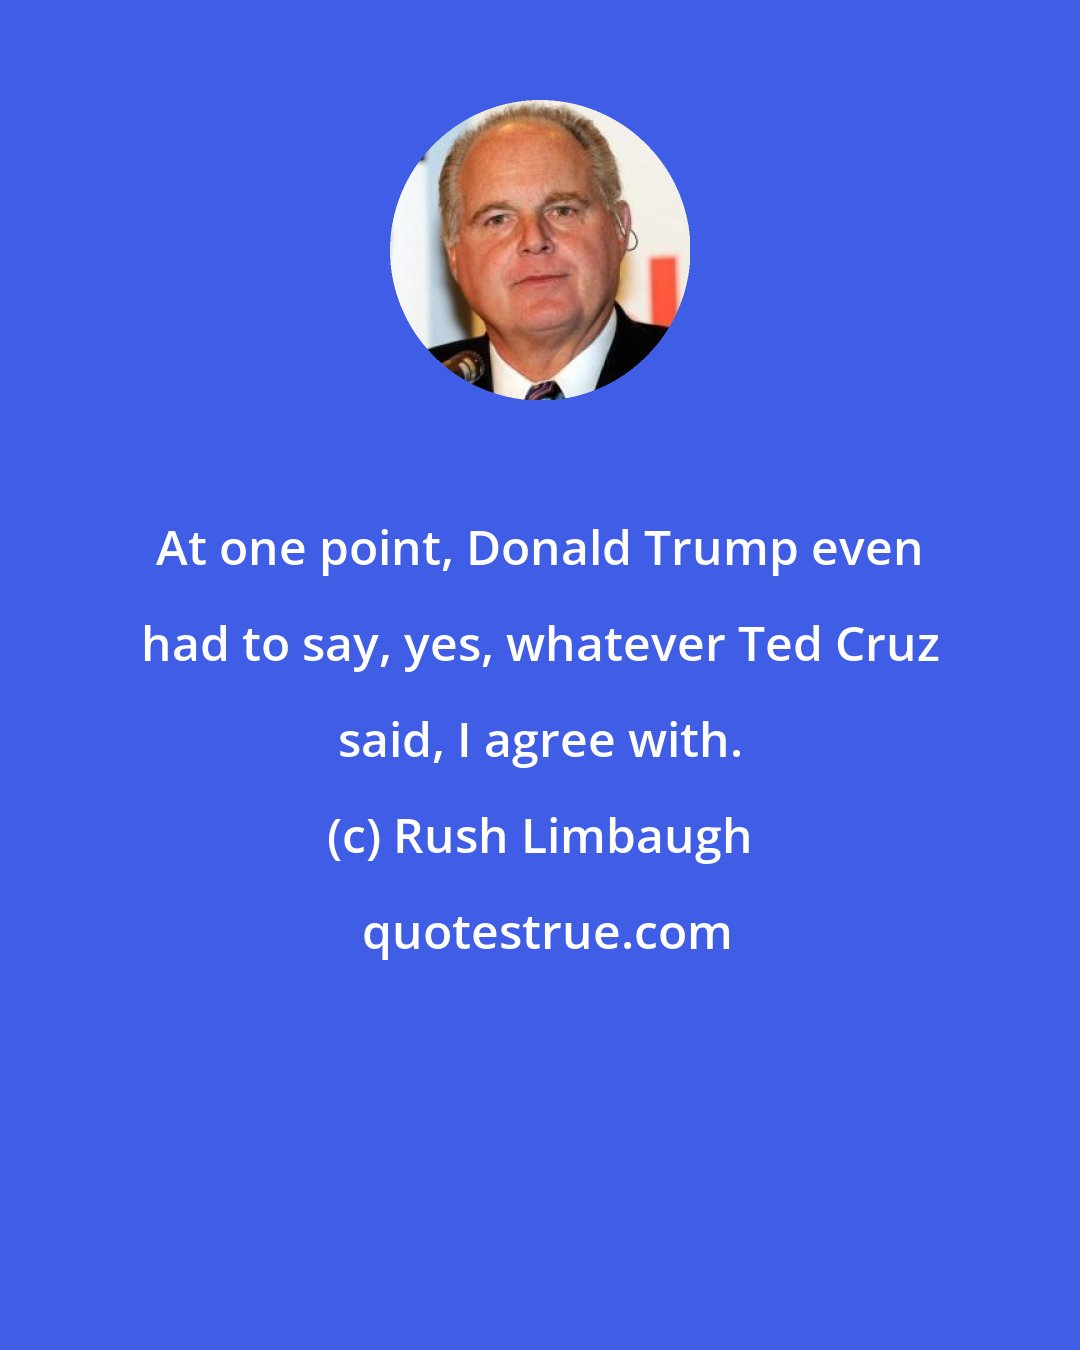 Rush Limbaugh: At one point, Donald Trump even had to say, yes, whatever Ted Cruz said, I agree with.